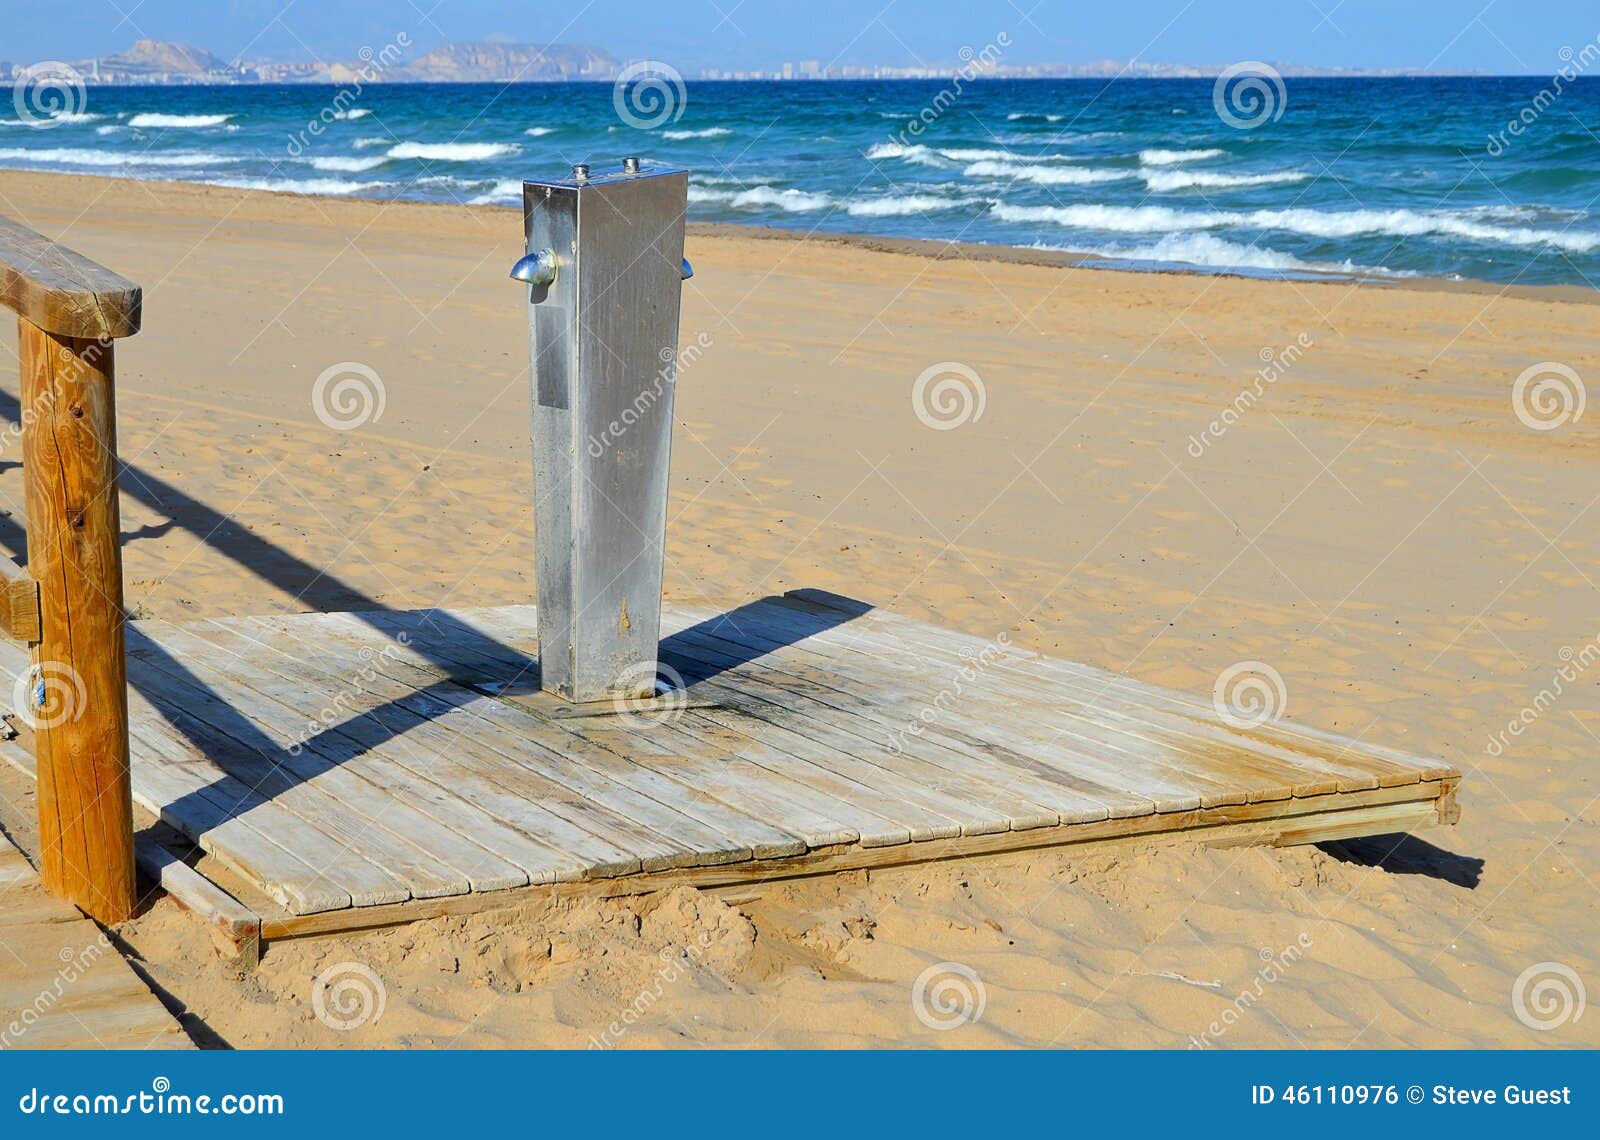 108 Beach Facebook Cover Photos Free Royalty Free Stock Photos From Dreamstime